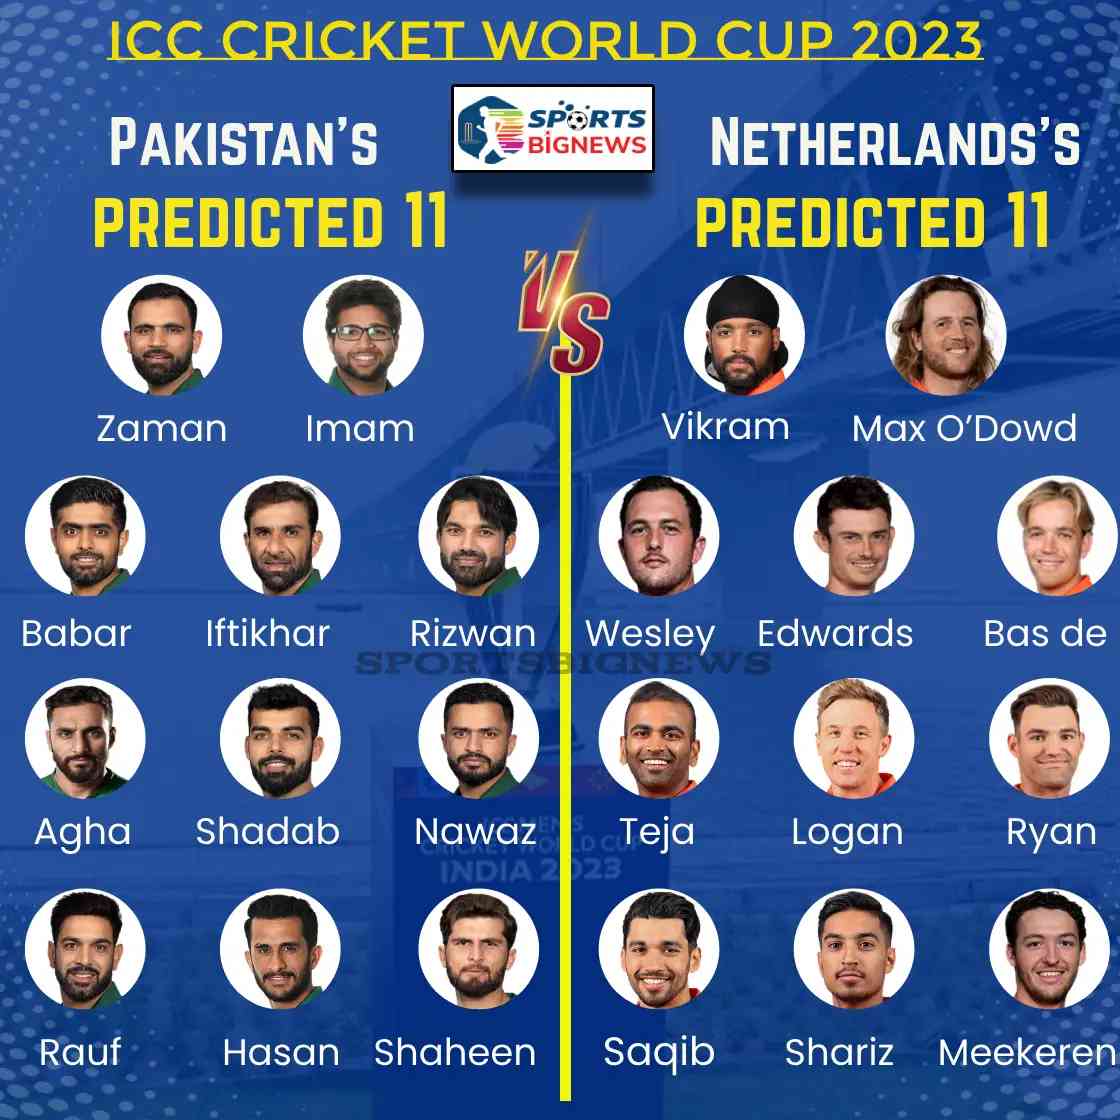 PAK Vs NED, Dream11 Prediction, Team Analysis For World Cup 2023